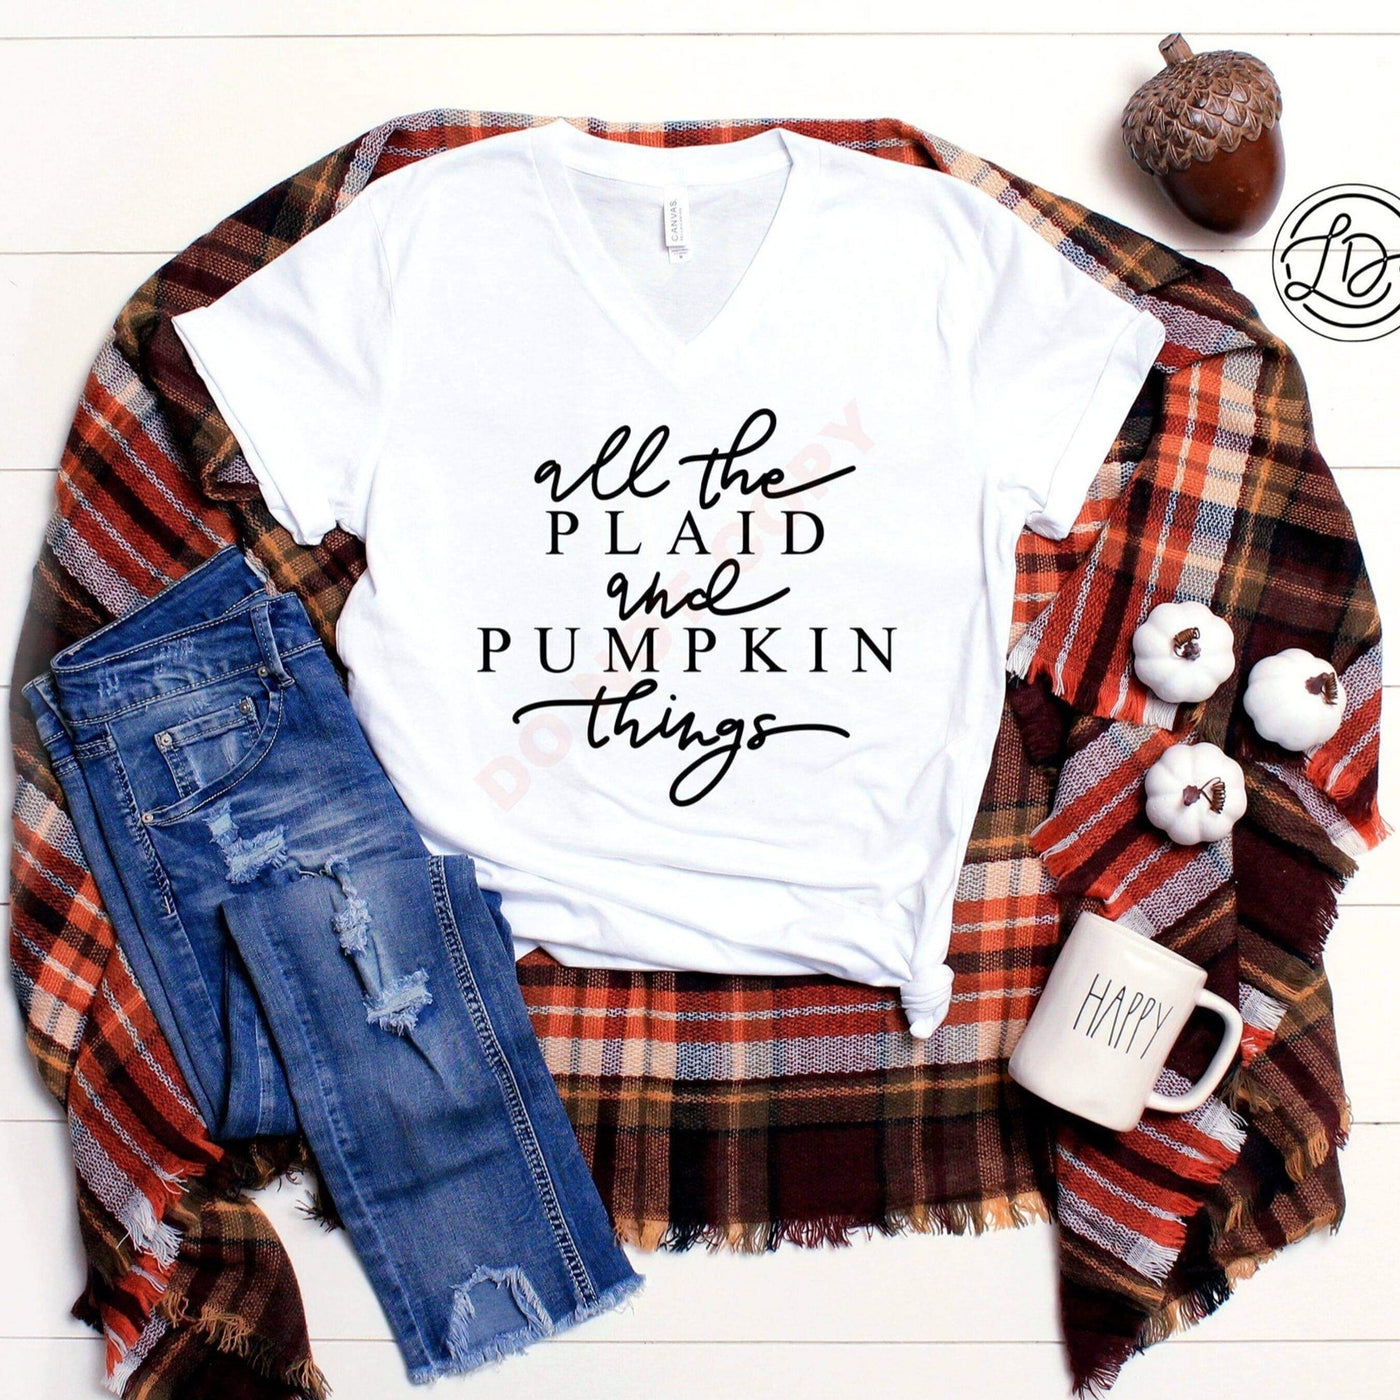 🌟 SALE 🌟 "All the Plaid and Pumpkin Things" T-shirt (shown on "White") **FINISHED TEE WILL BE ON A CREWNECK**